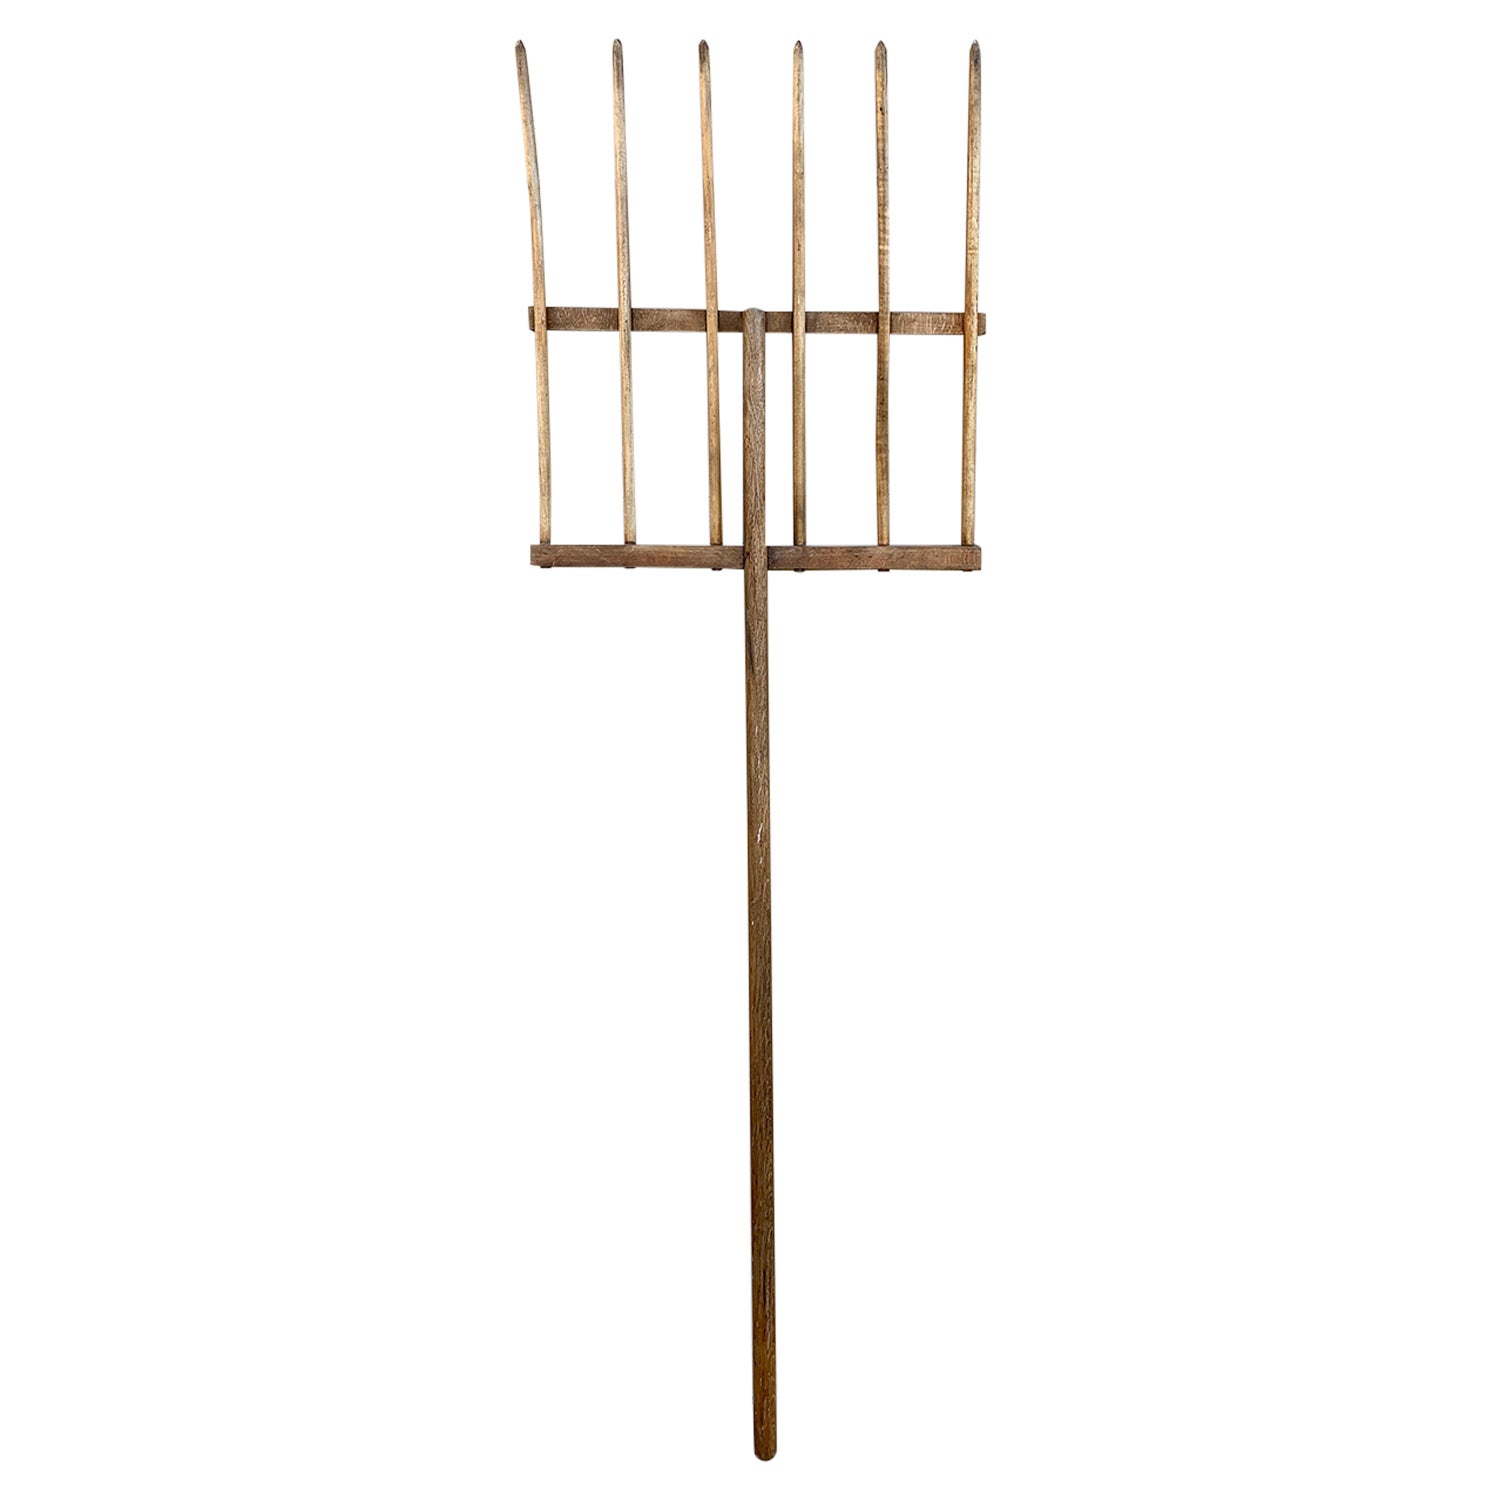 Antique 19th Century Monumental Hand Made Wooden Pitchfork For Sale